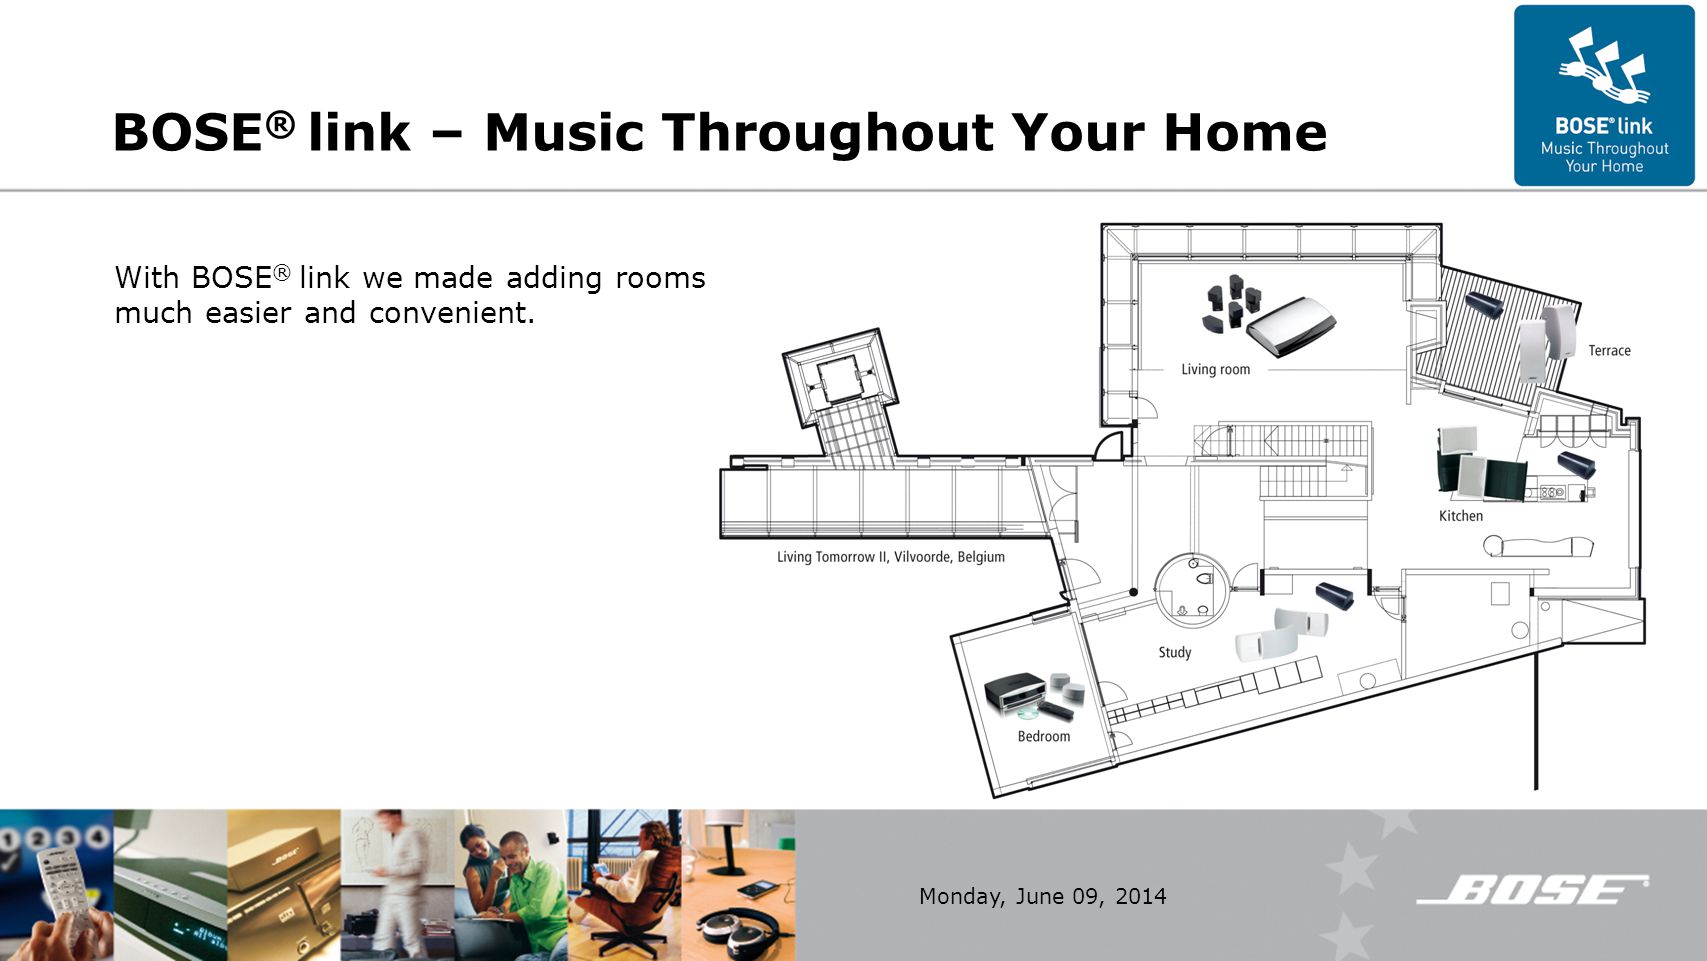 BOSE® link – Music Throughout Your Home - ppt video online download